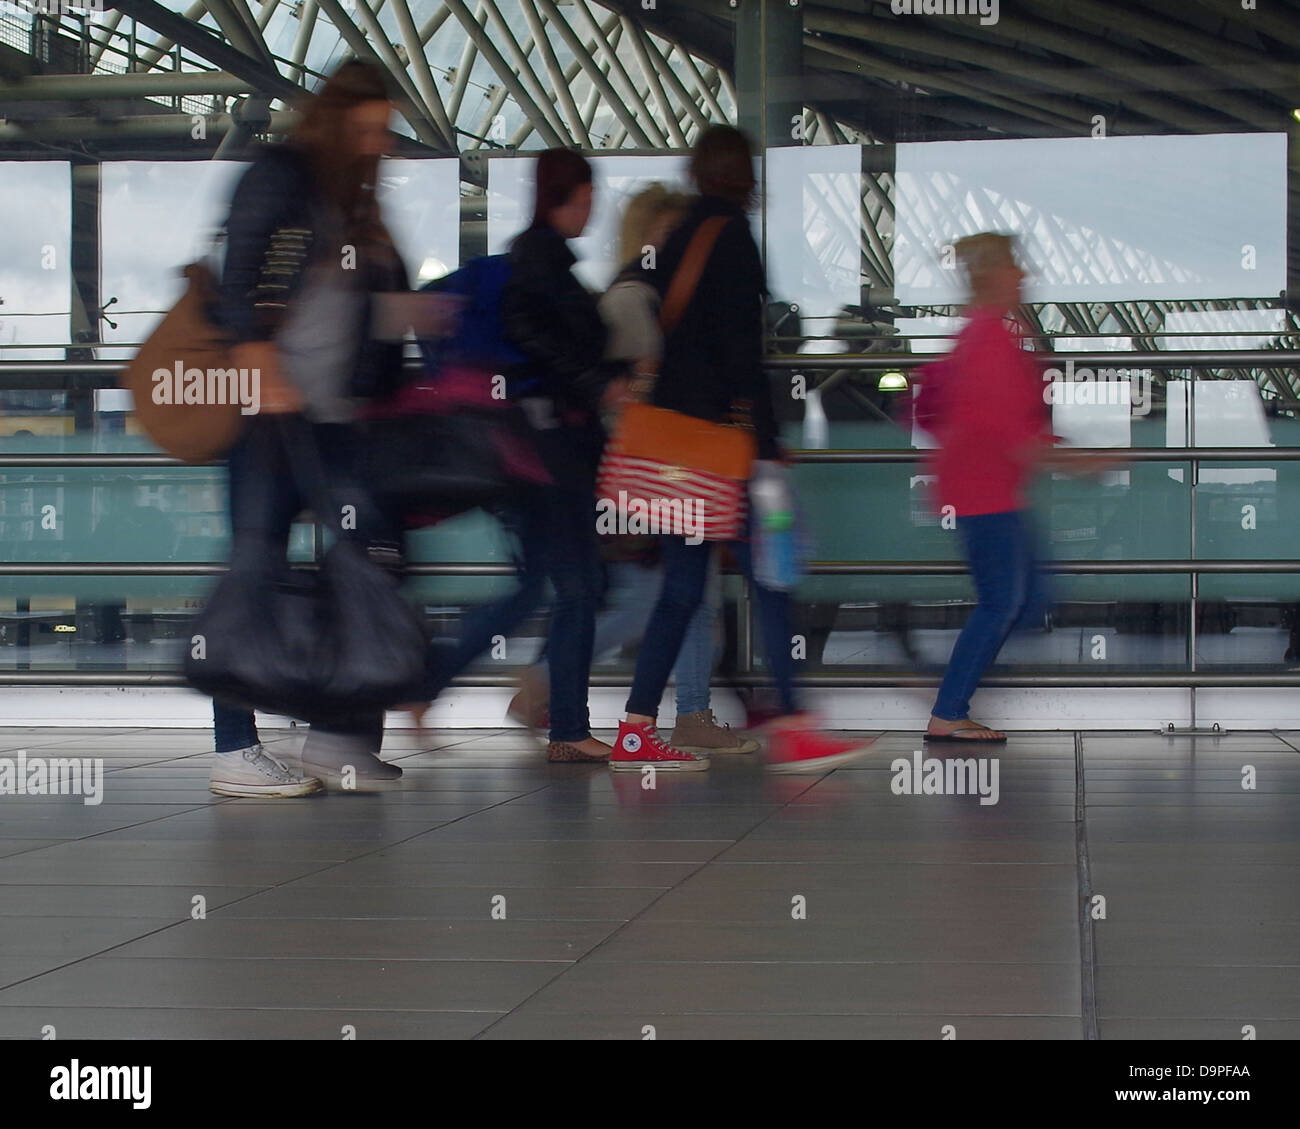 A group of women late rush to catch public transport to work, Motion blur to show movement. Leeds railway station Stock Photo